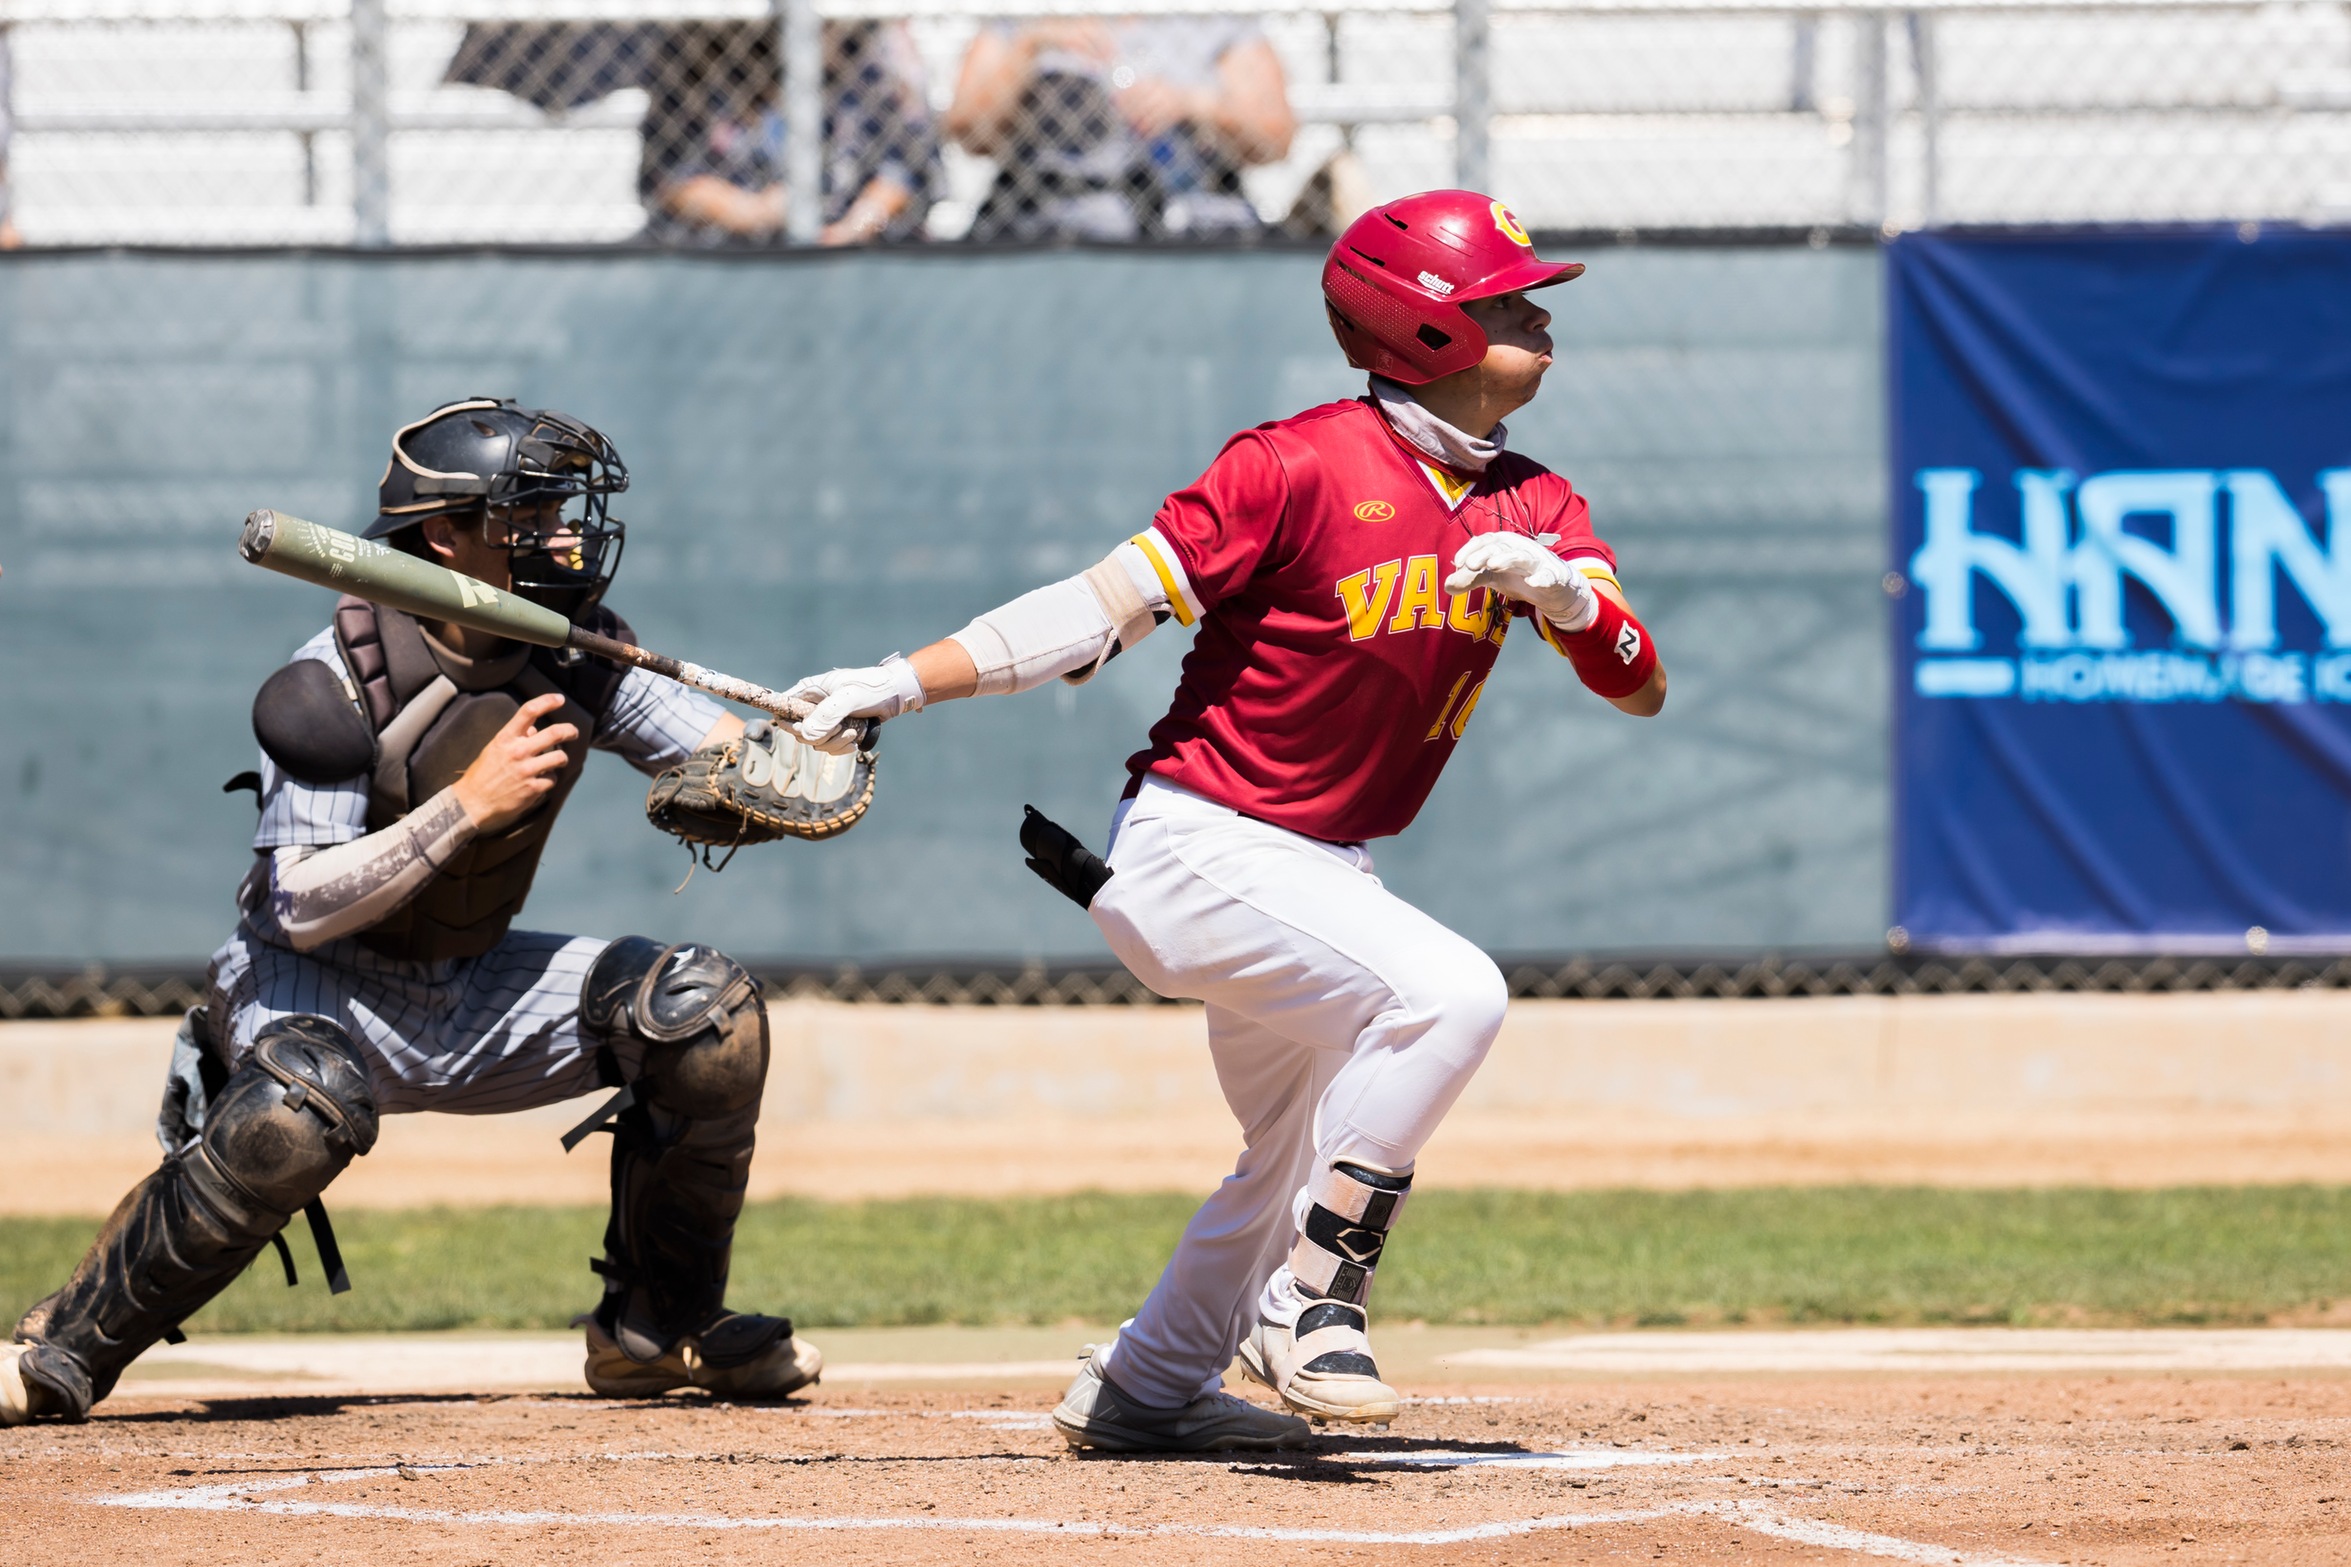 GCC Baseball clinches at least a tie for 2022 WSC South Title with 21-13 win over Canyons April 8; Vaqs now 15-0 in conference and 26-5 overall and have won 16 straight games.